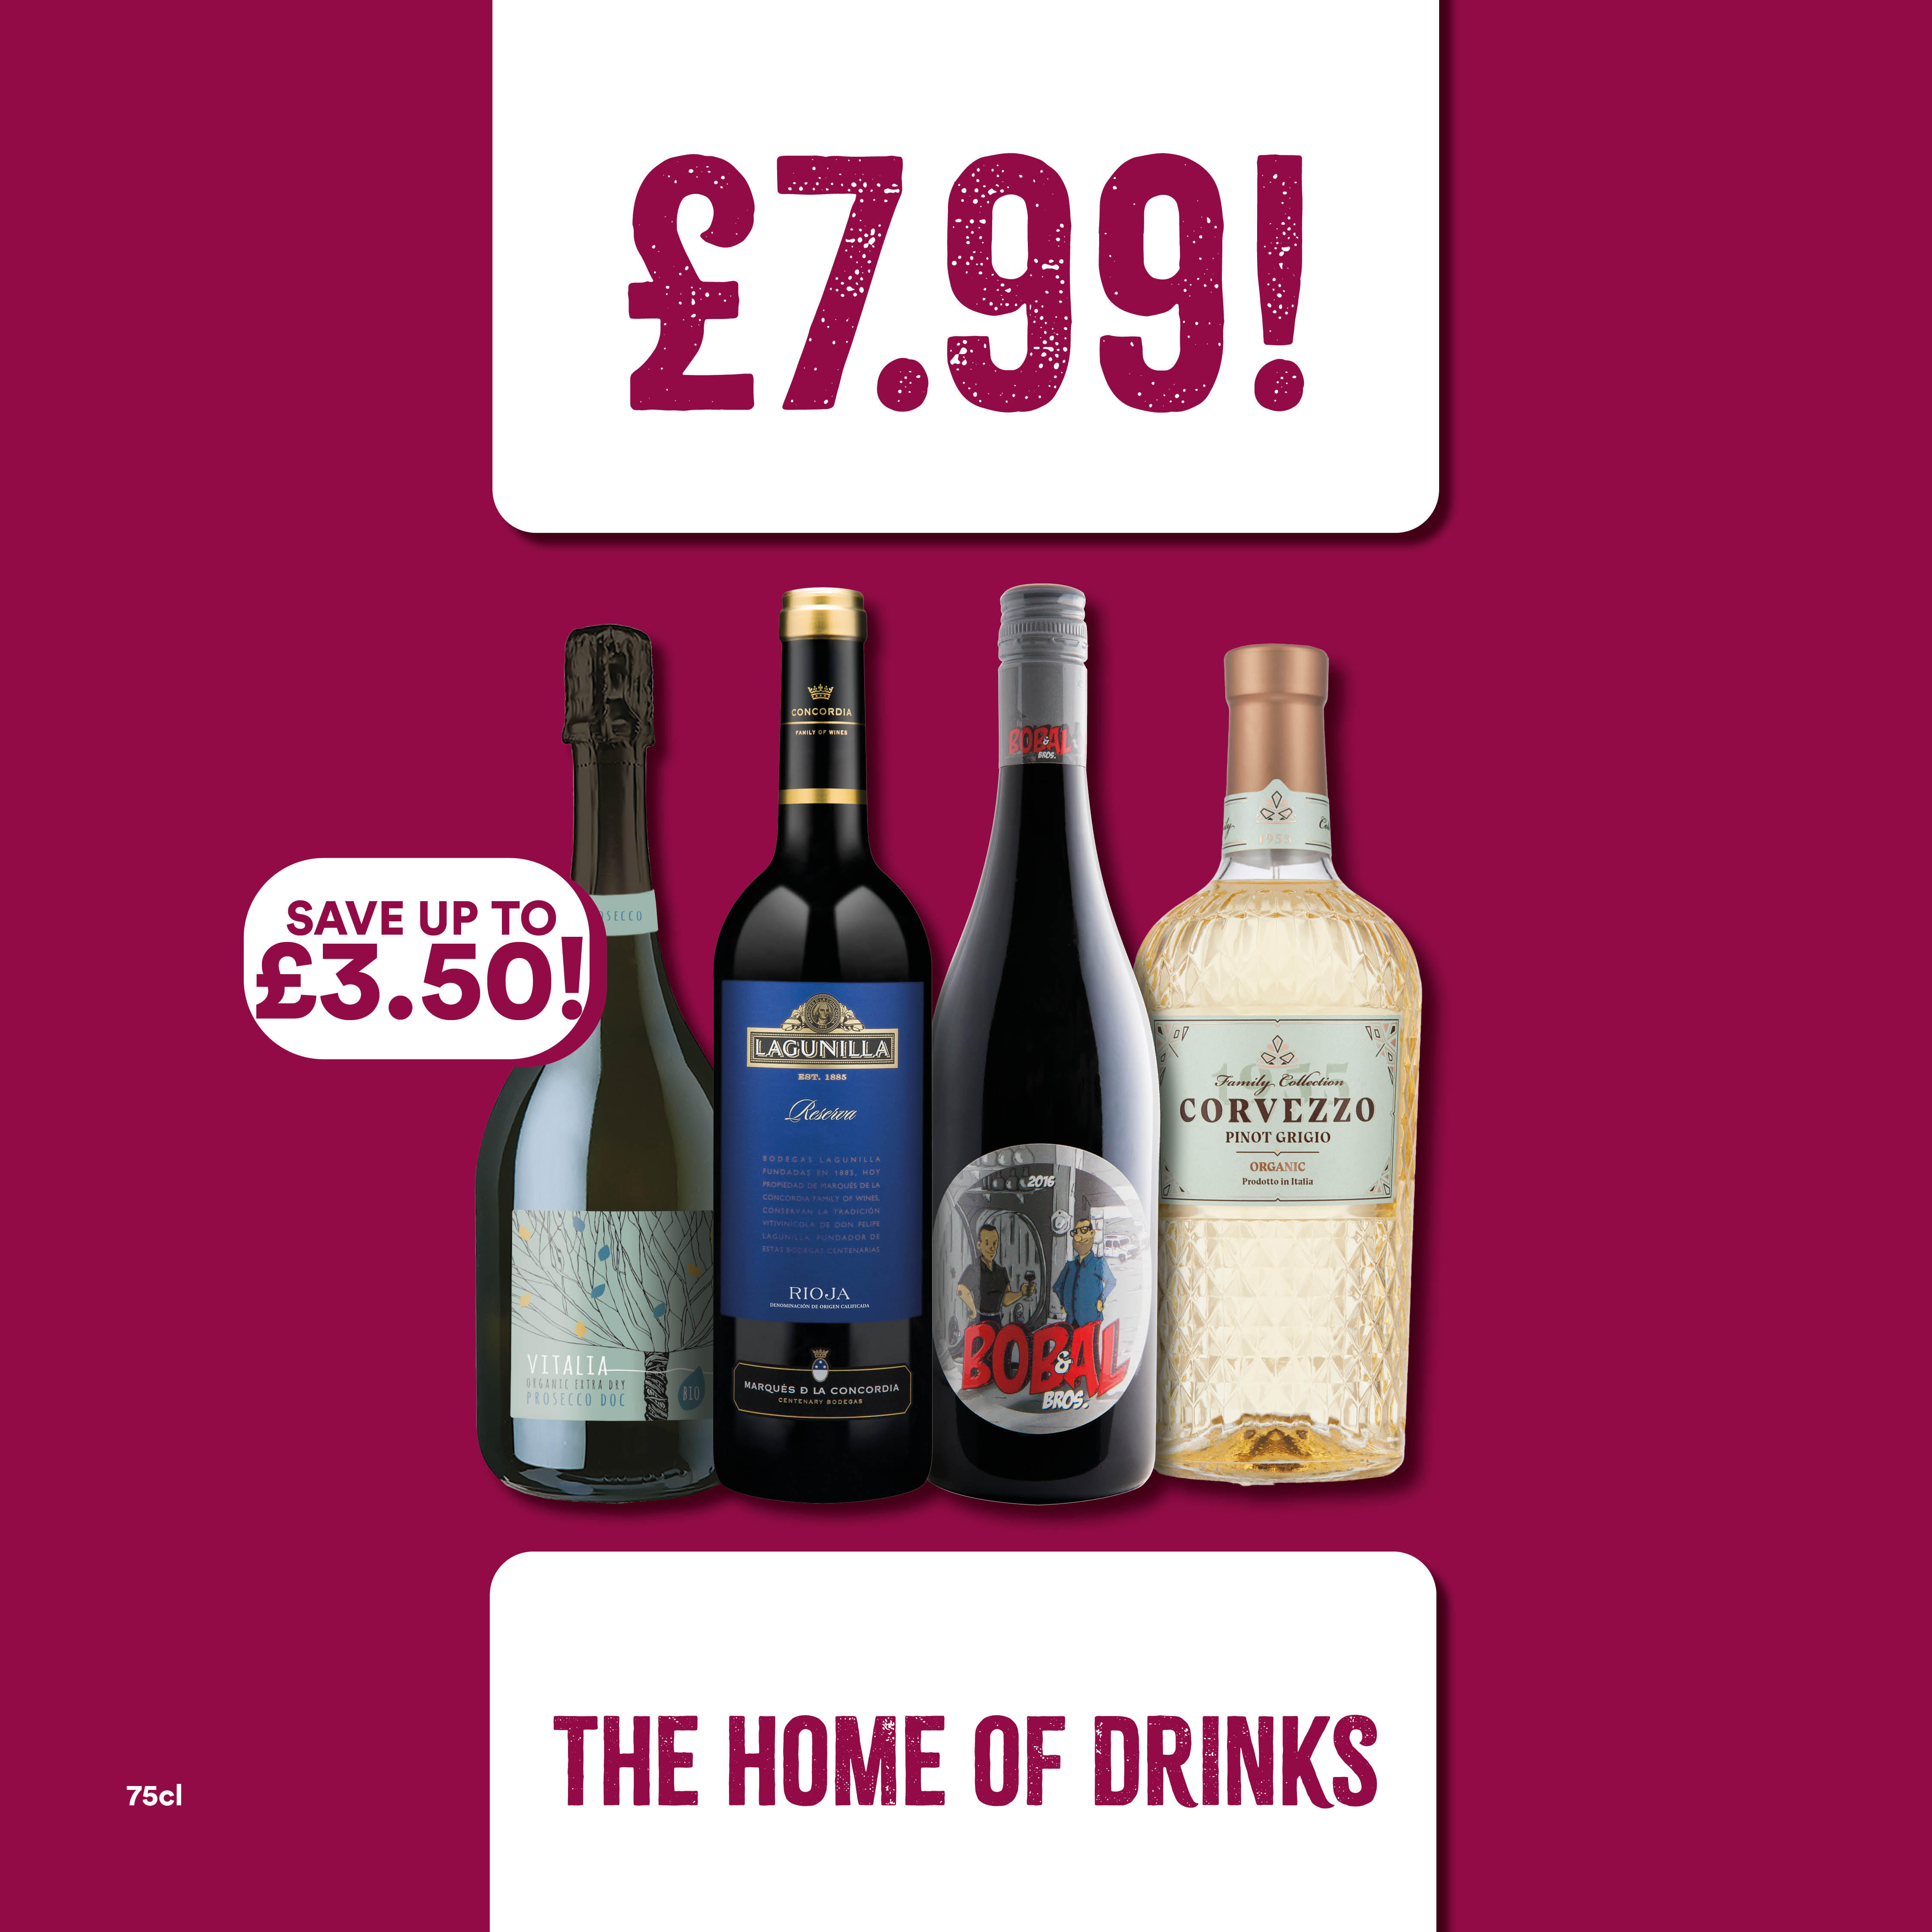 £7.99 on selected wines Bargain Booze Select Convenience Leicester 01162 302553